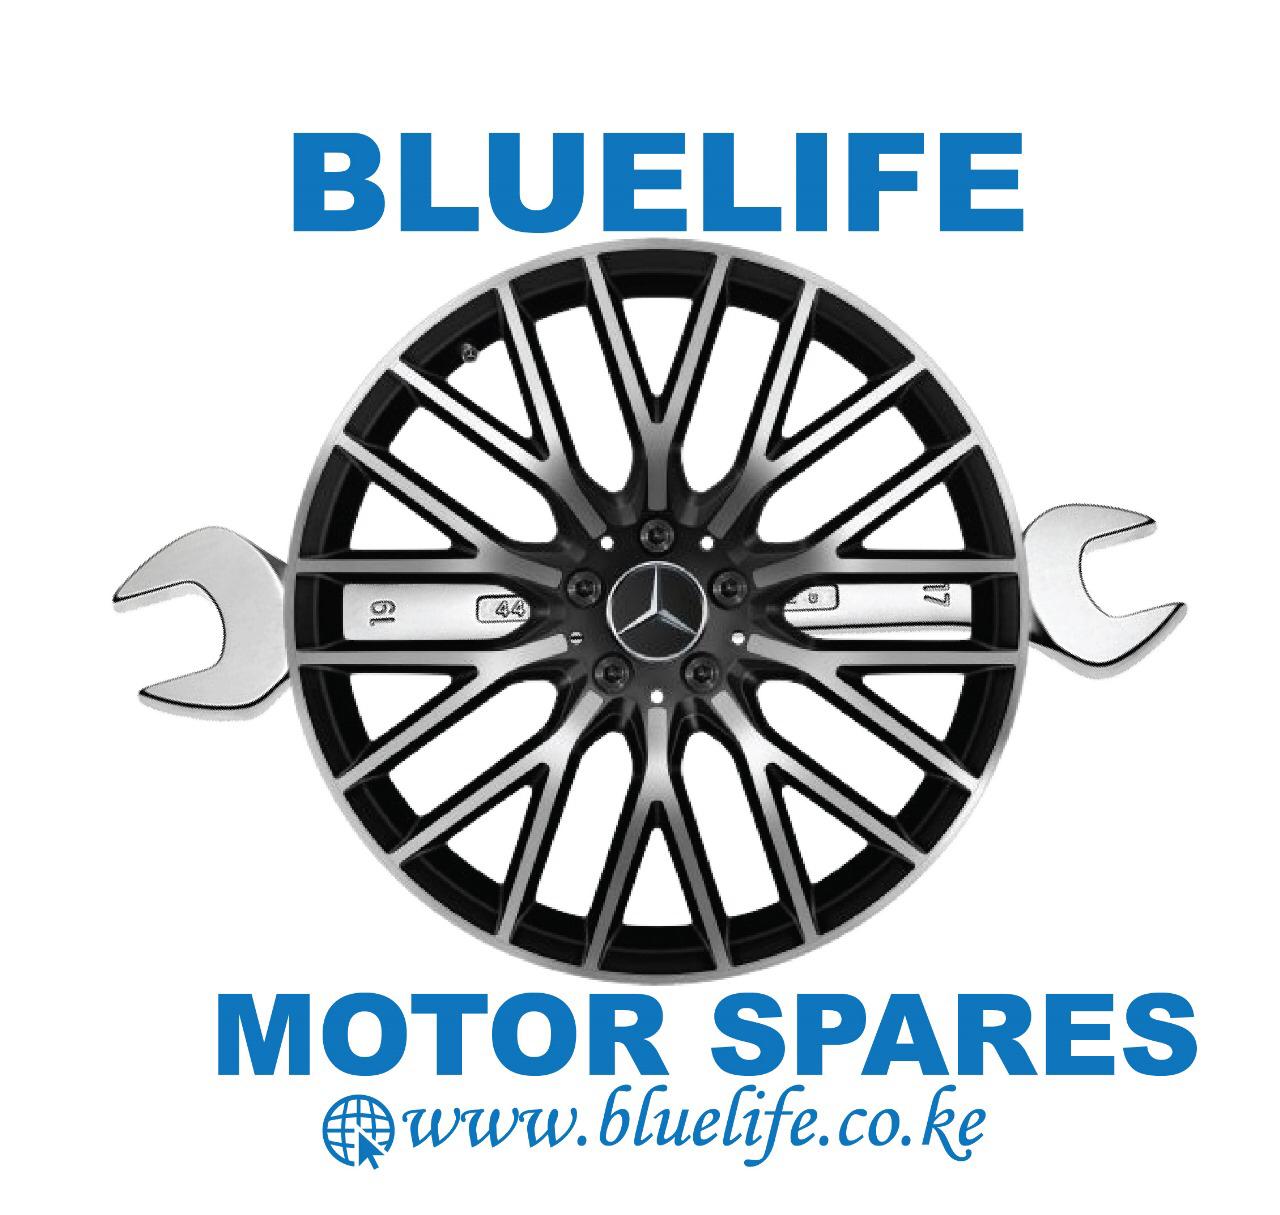 Bluelife Motor Spares